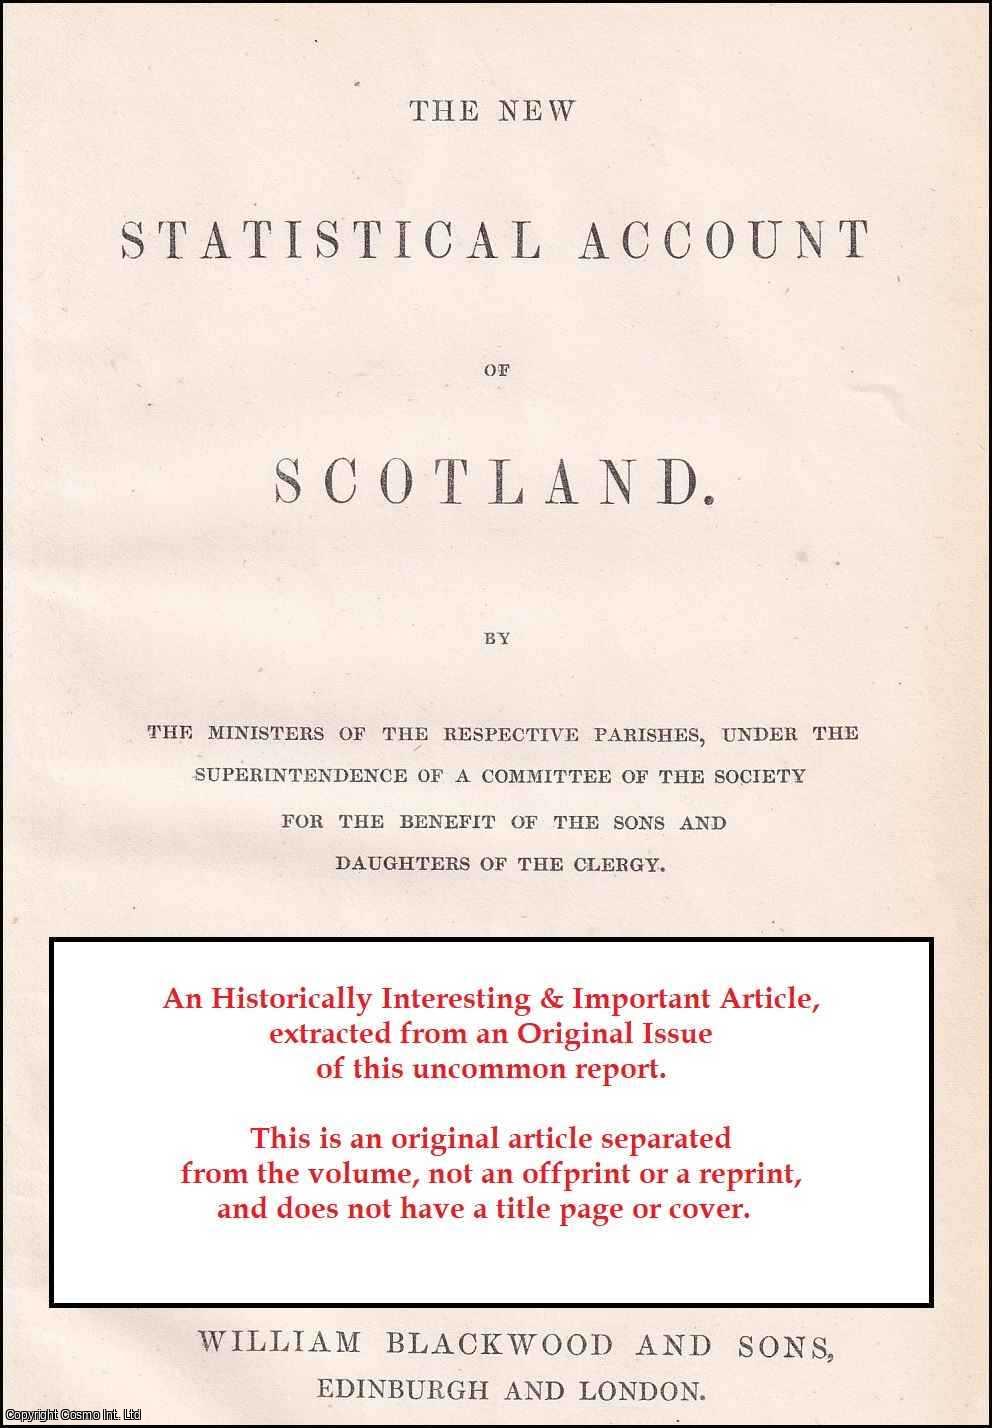 Rev. John Cook - Parish of Laurencekirk. Presbytery of Fordoun, Synod of Angus and Mearns. An uncommon original article from The New Statistical Account of Scotland, 1845.